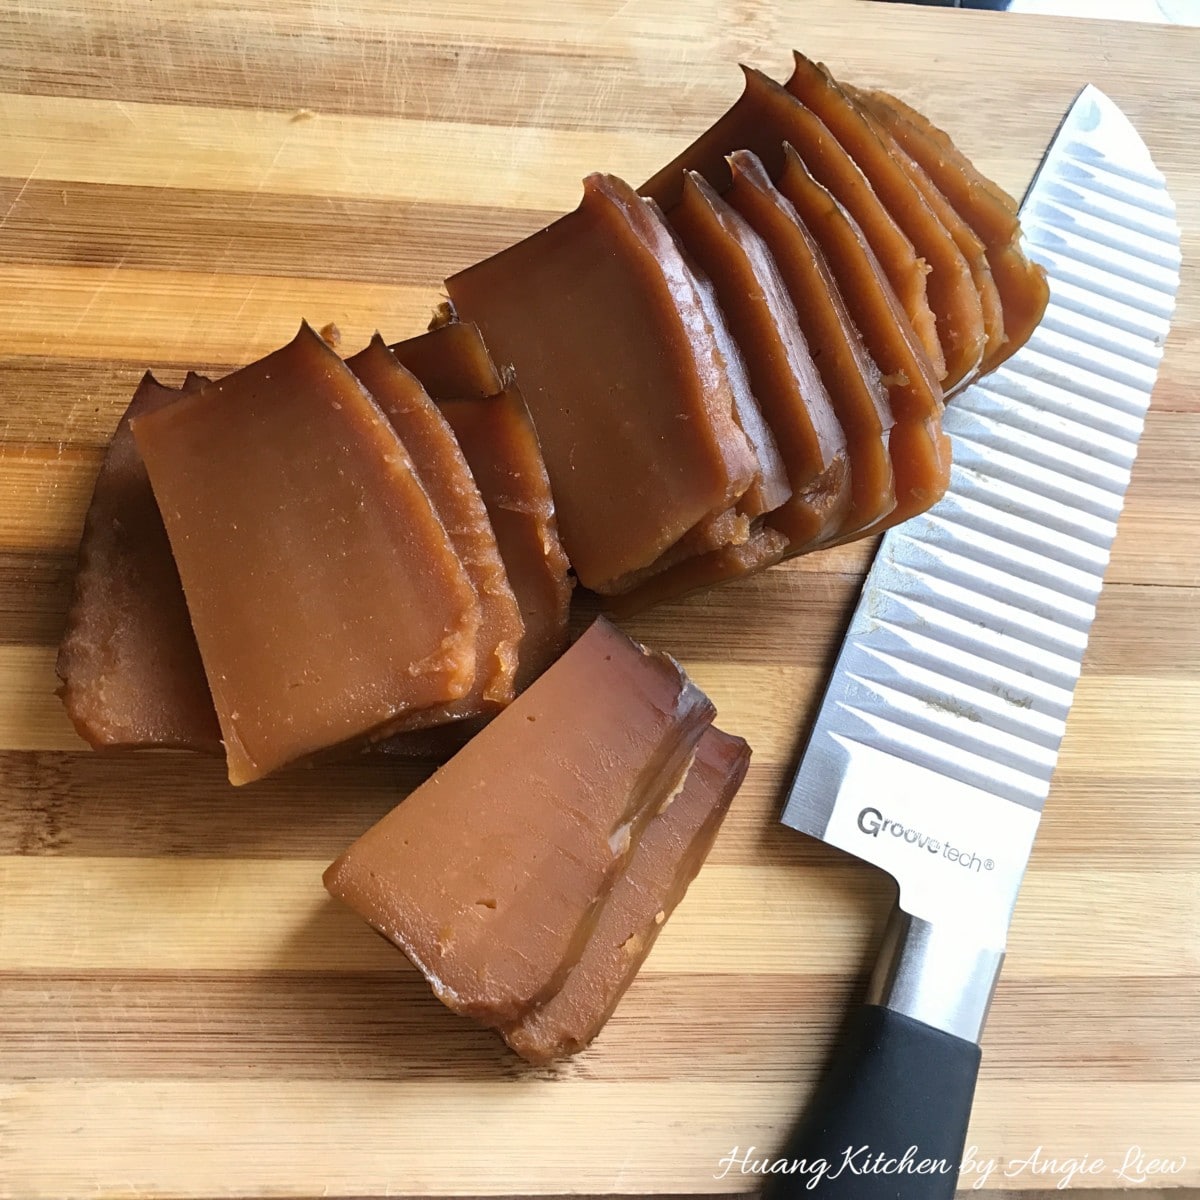 Cut nian gao into thin slices.